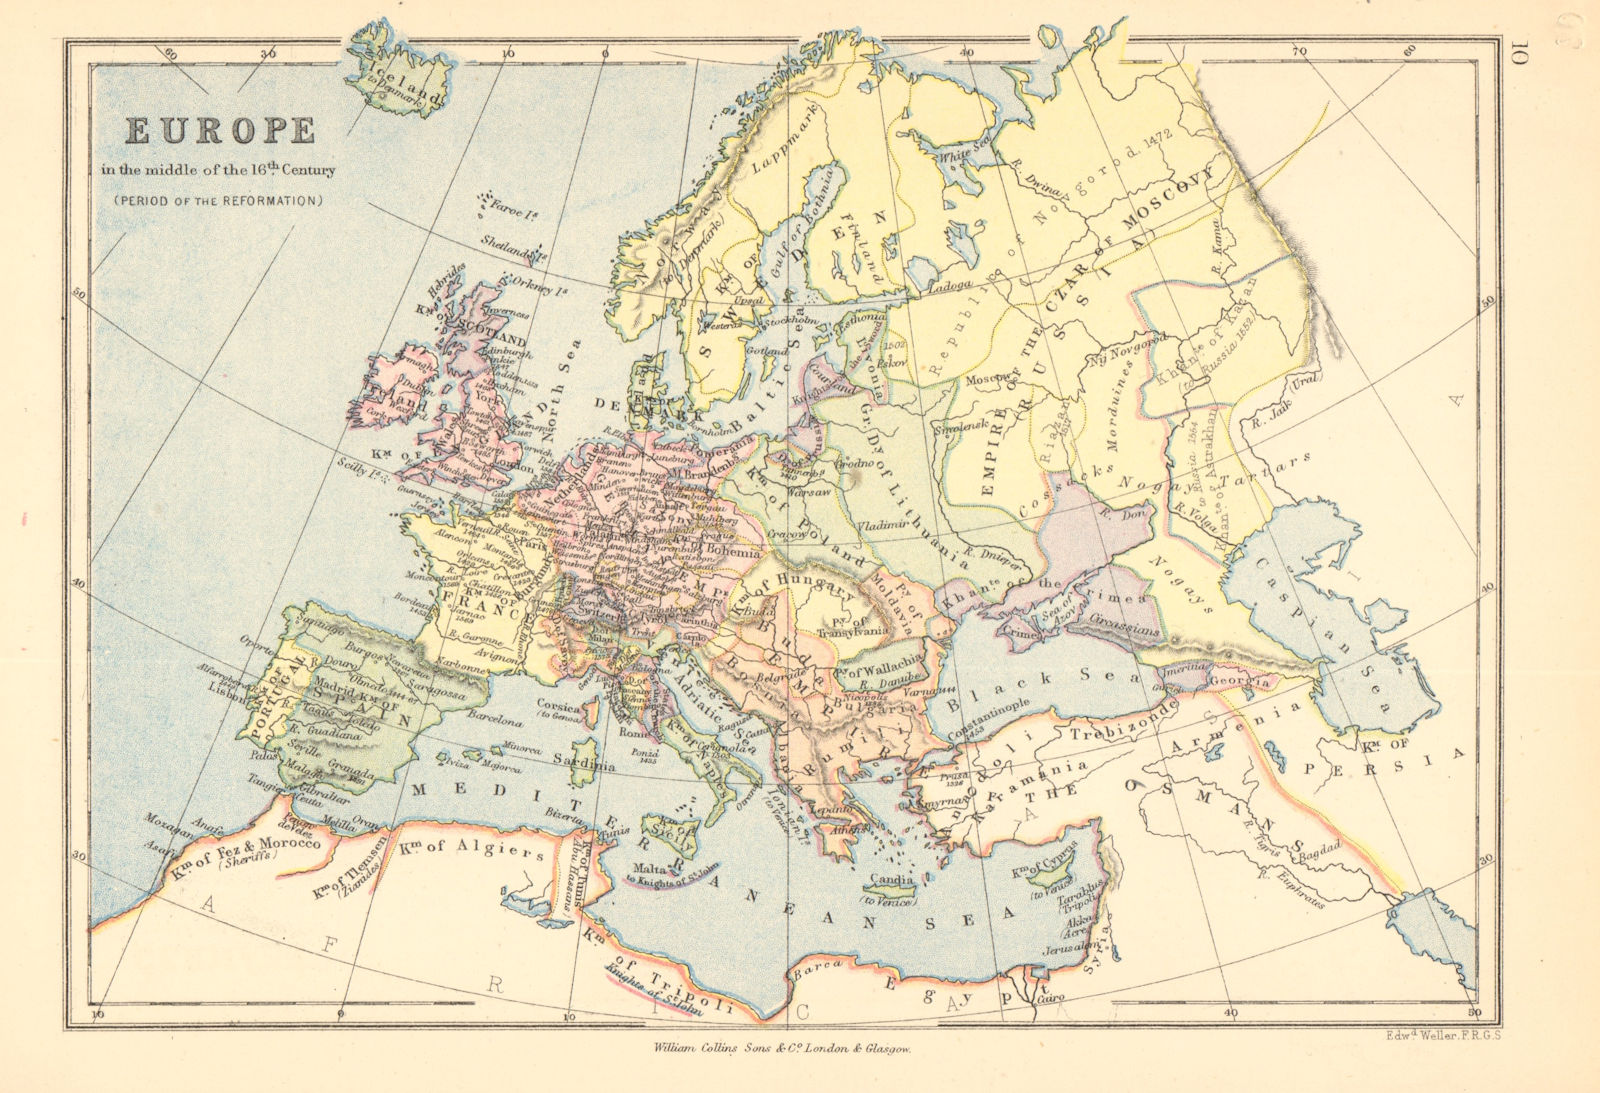 'Europe in the middle of the 16th Century (Period of the Reformation)' 1876 map